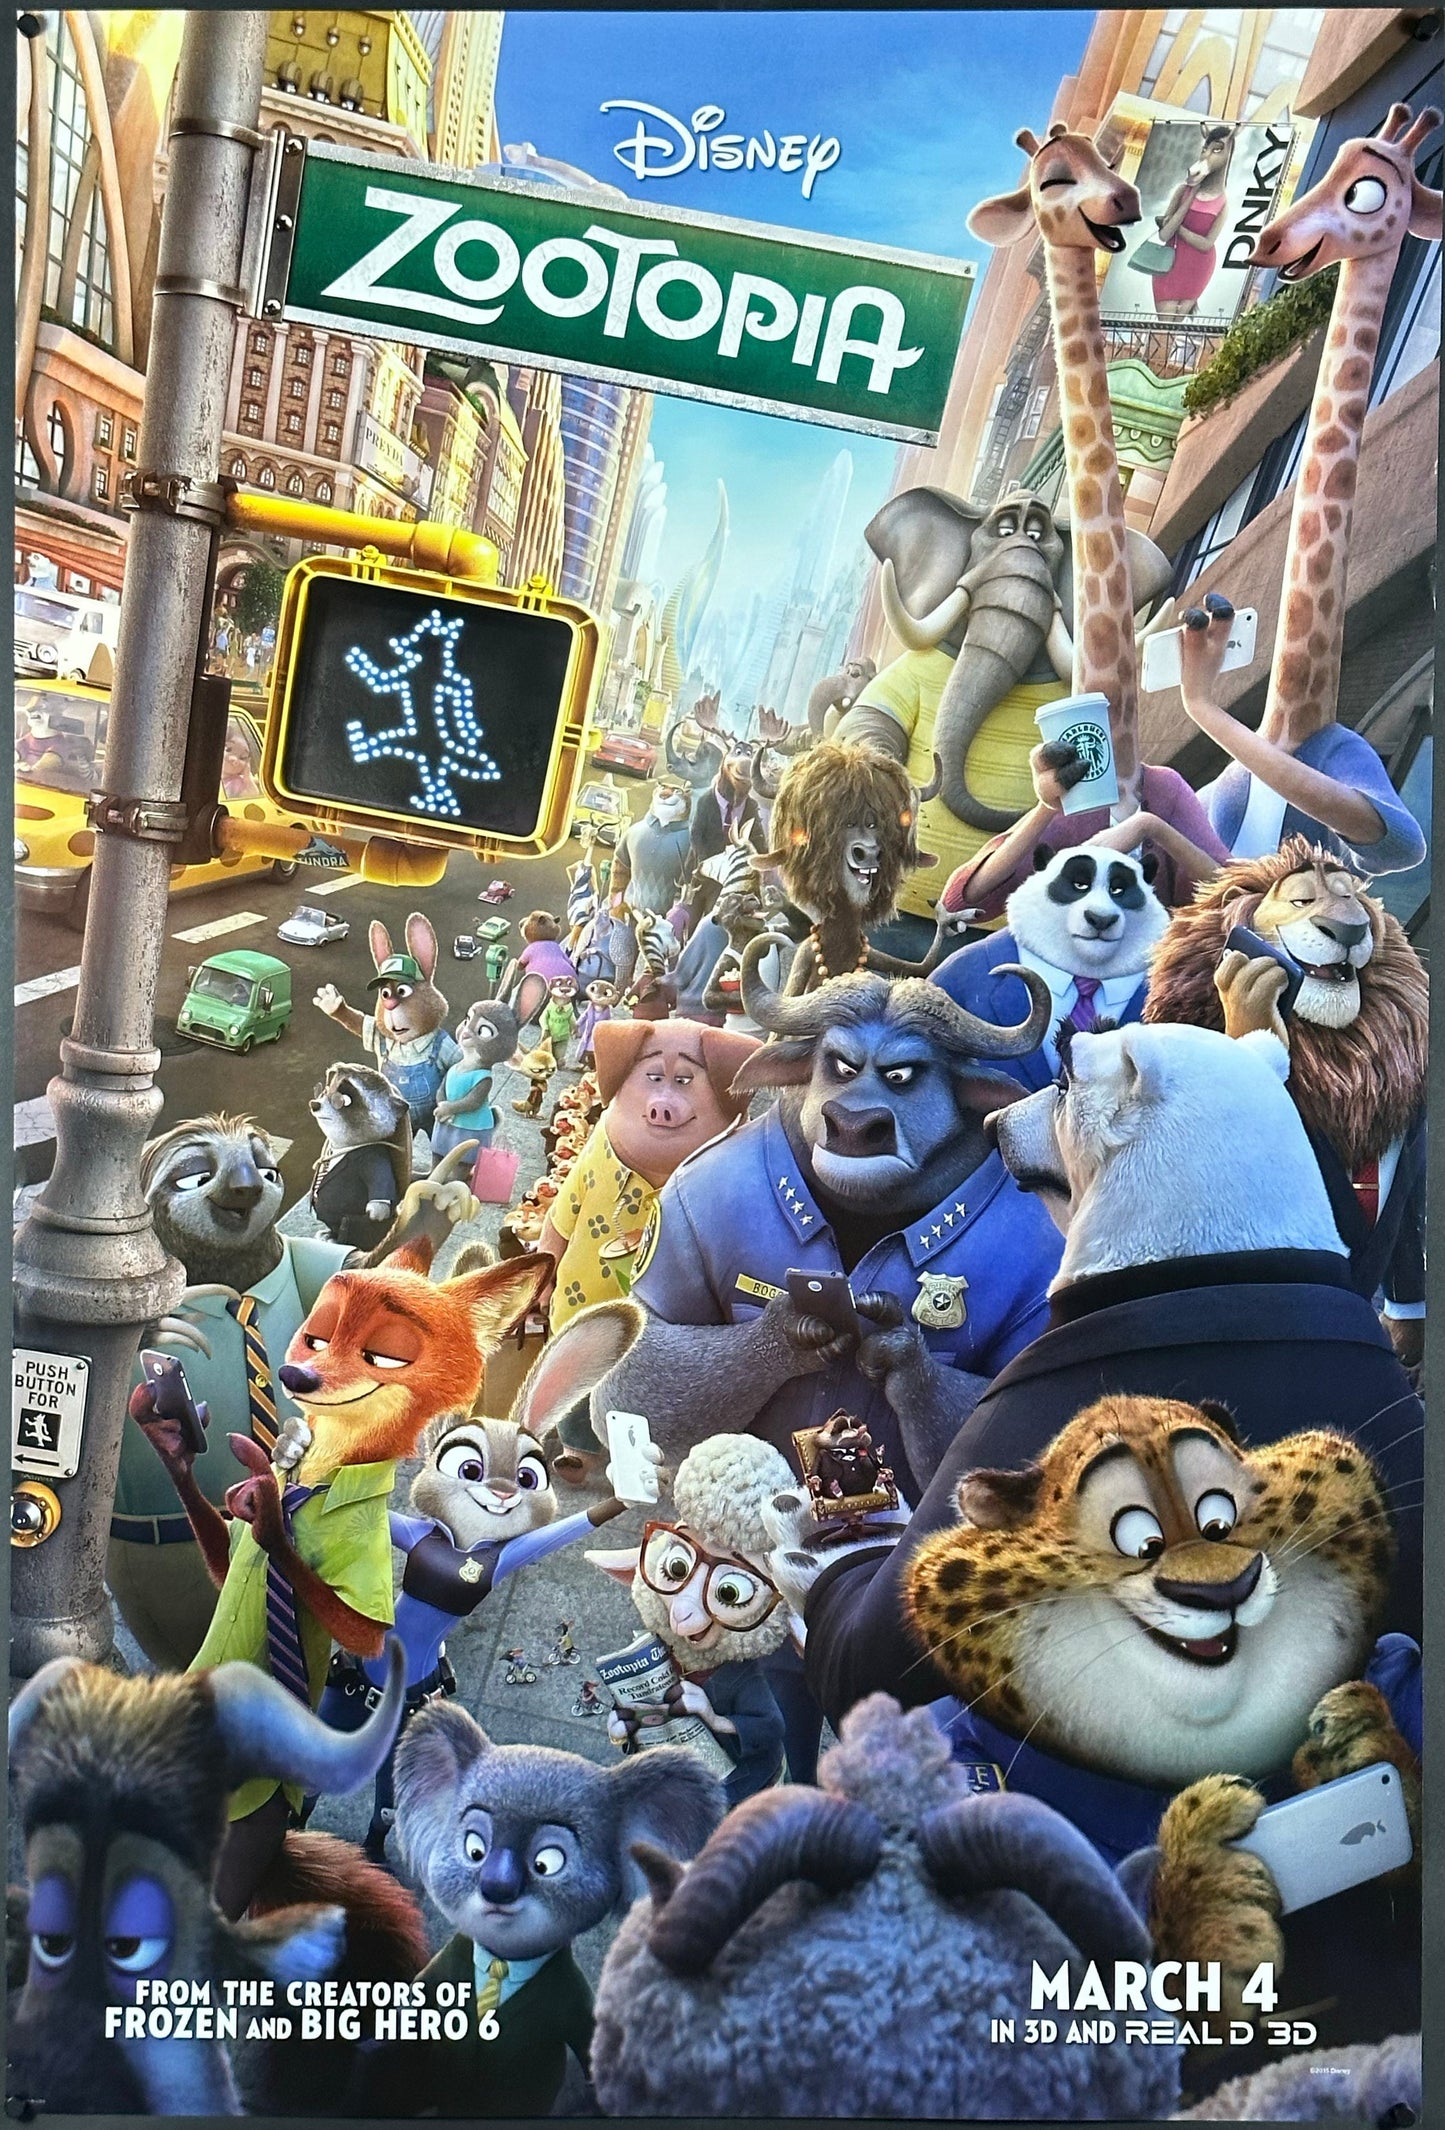 Zootopia US One Sheet Cast Style (2016) - ORIGINAL RELEASE - posterpalace.com